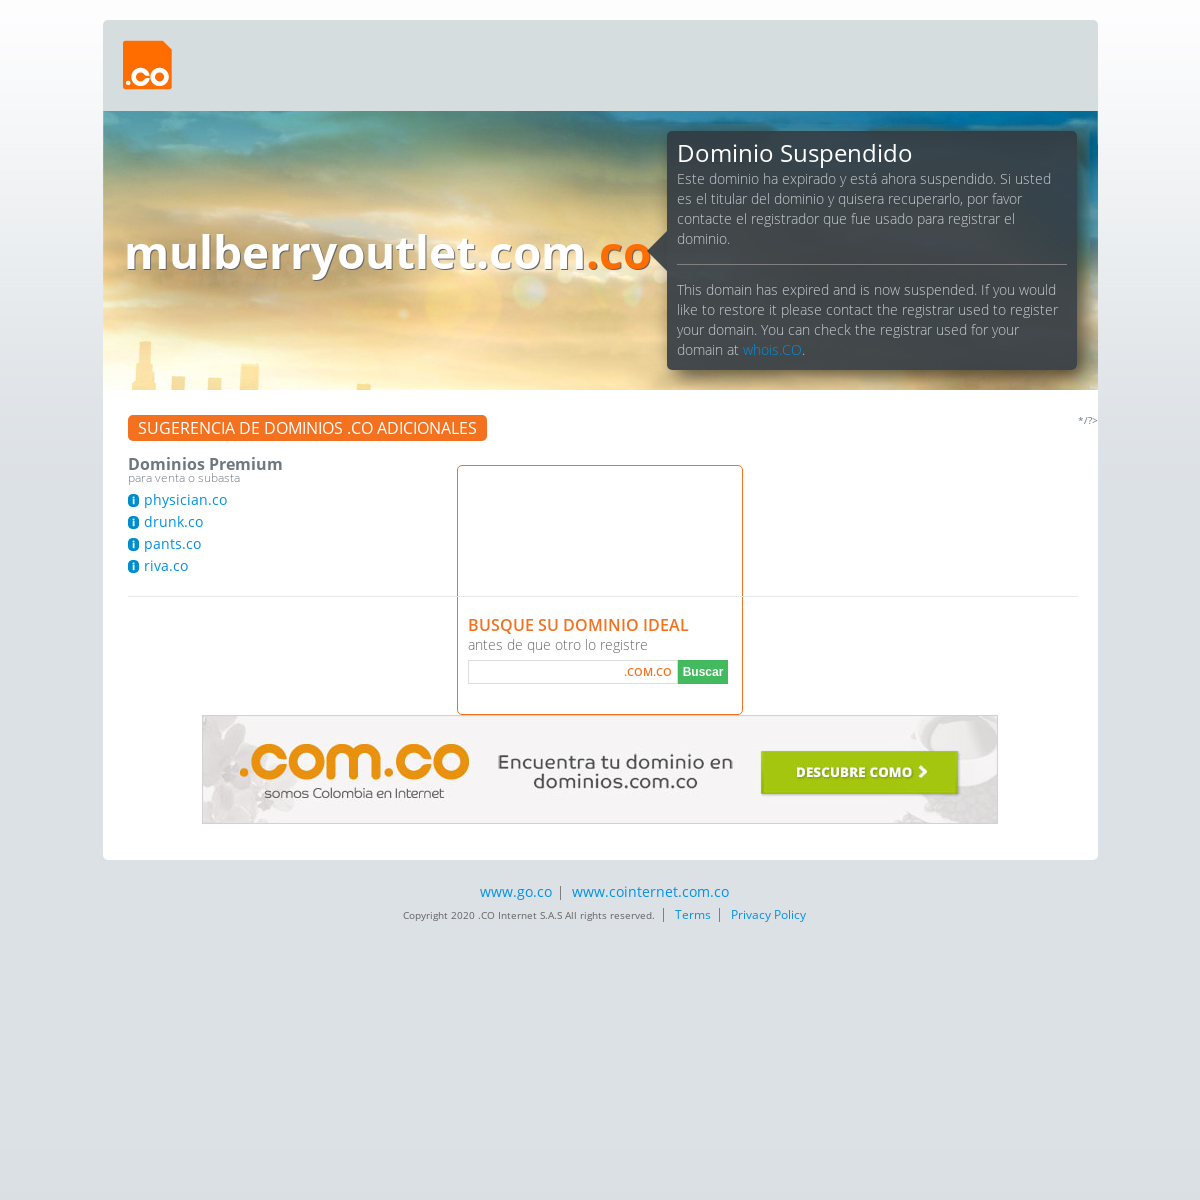 A complete backup of mulberryoutlet.com.co